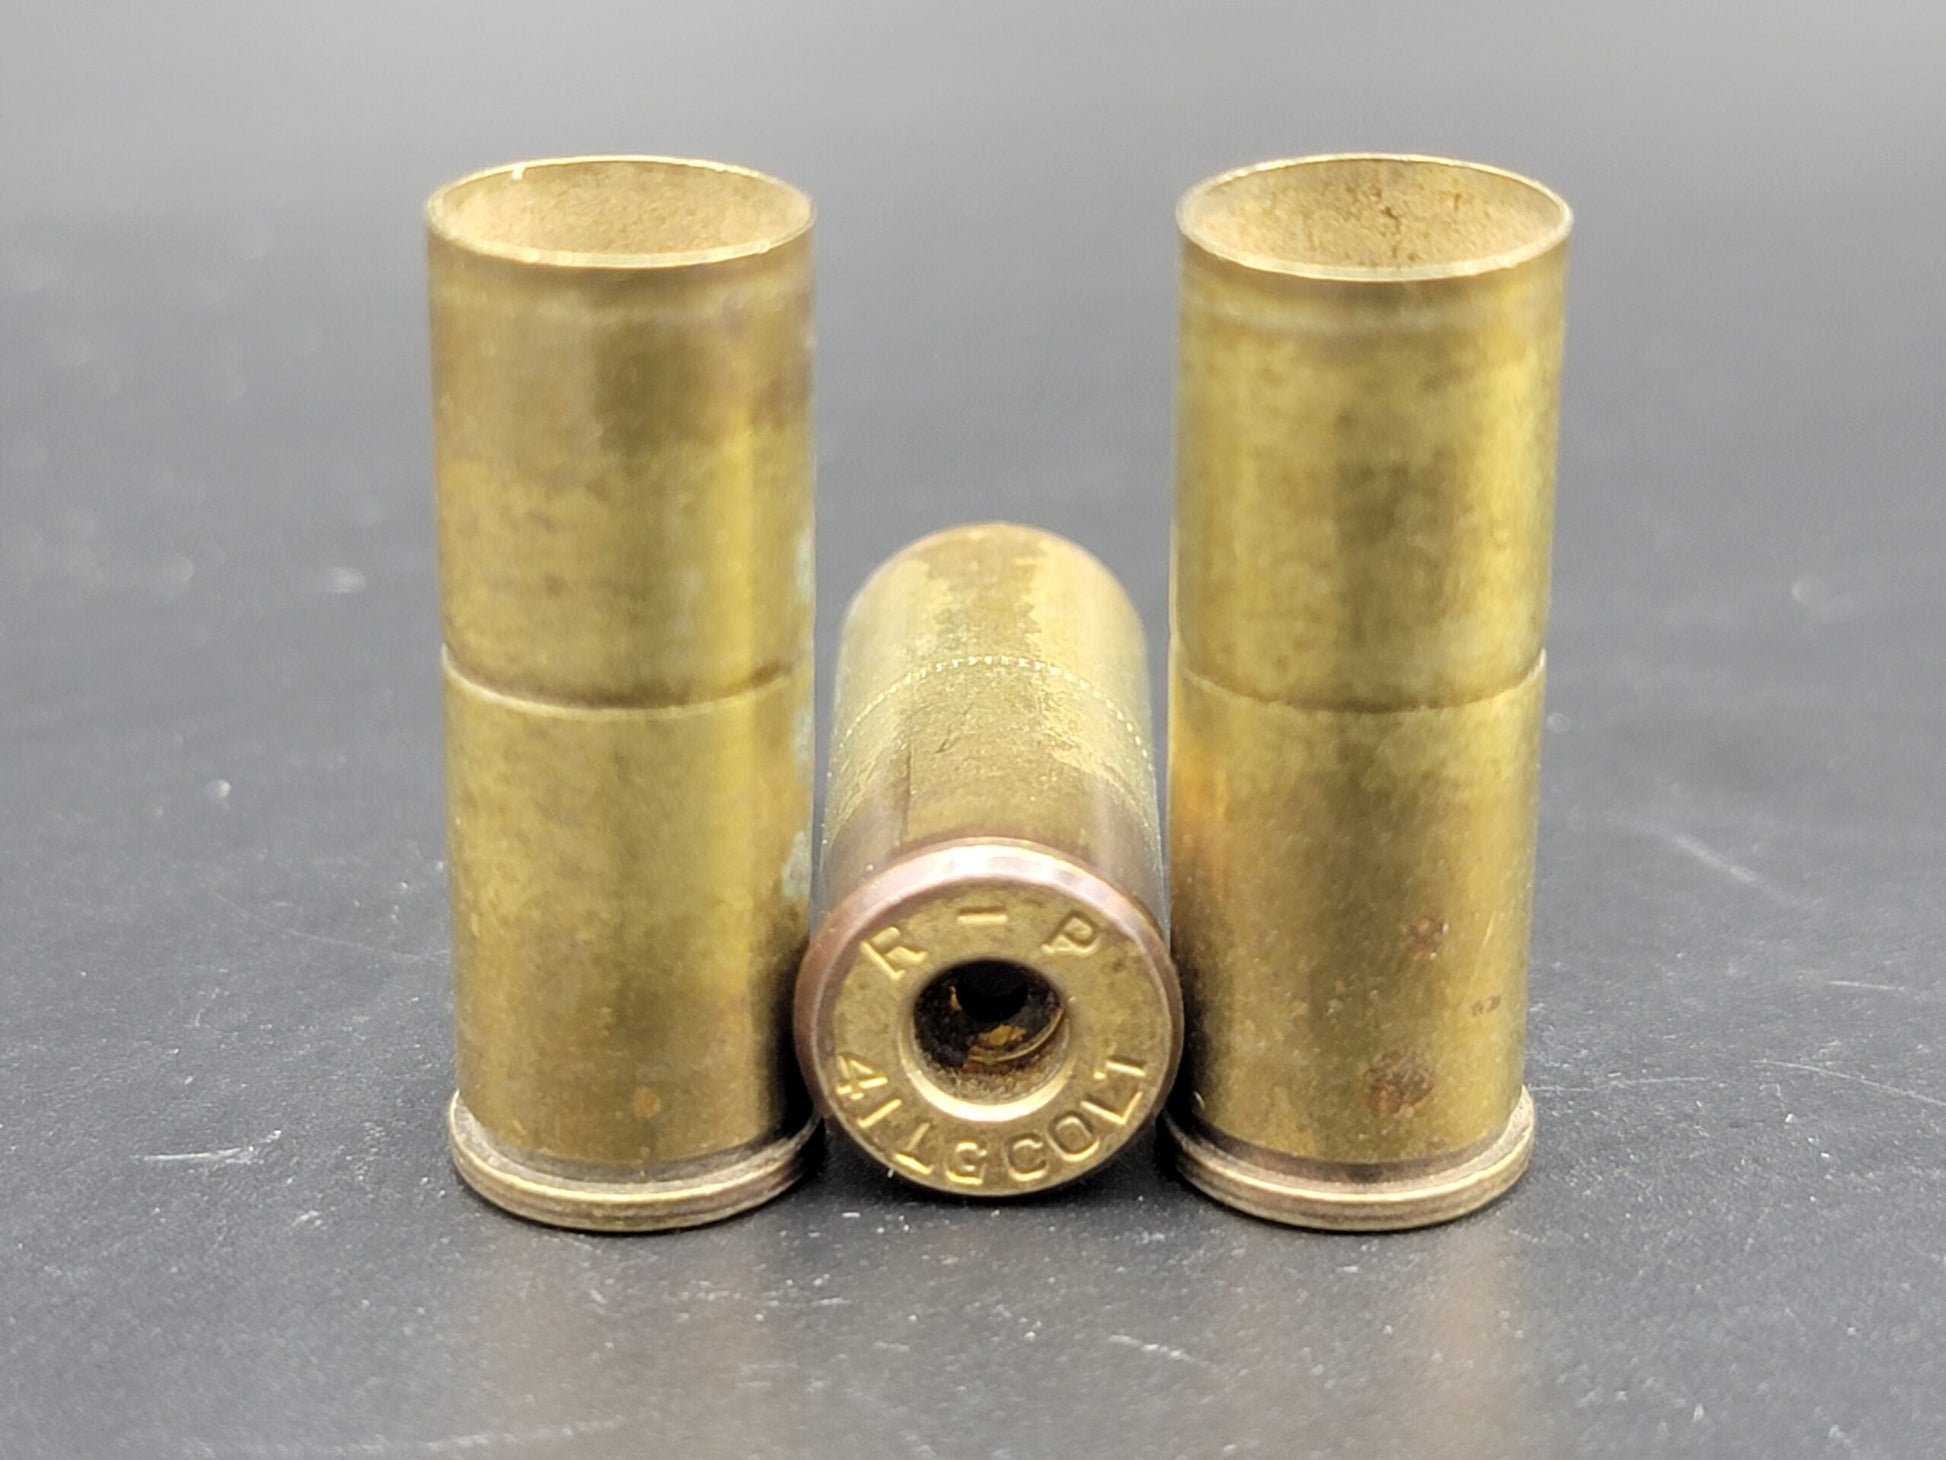 41 Long Colt once fired pistol brass. Hand sorted from reputable indoor/military ranges for reloading. Reliable spent casings for precision shooting.